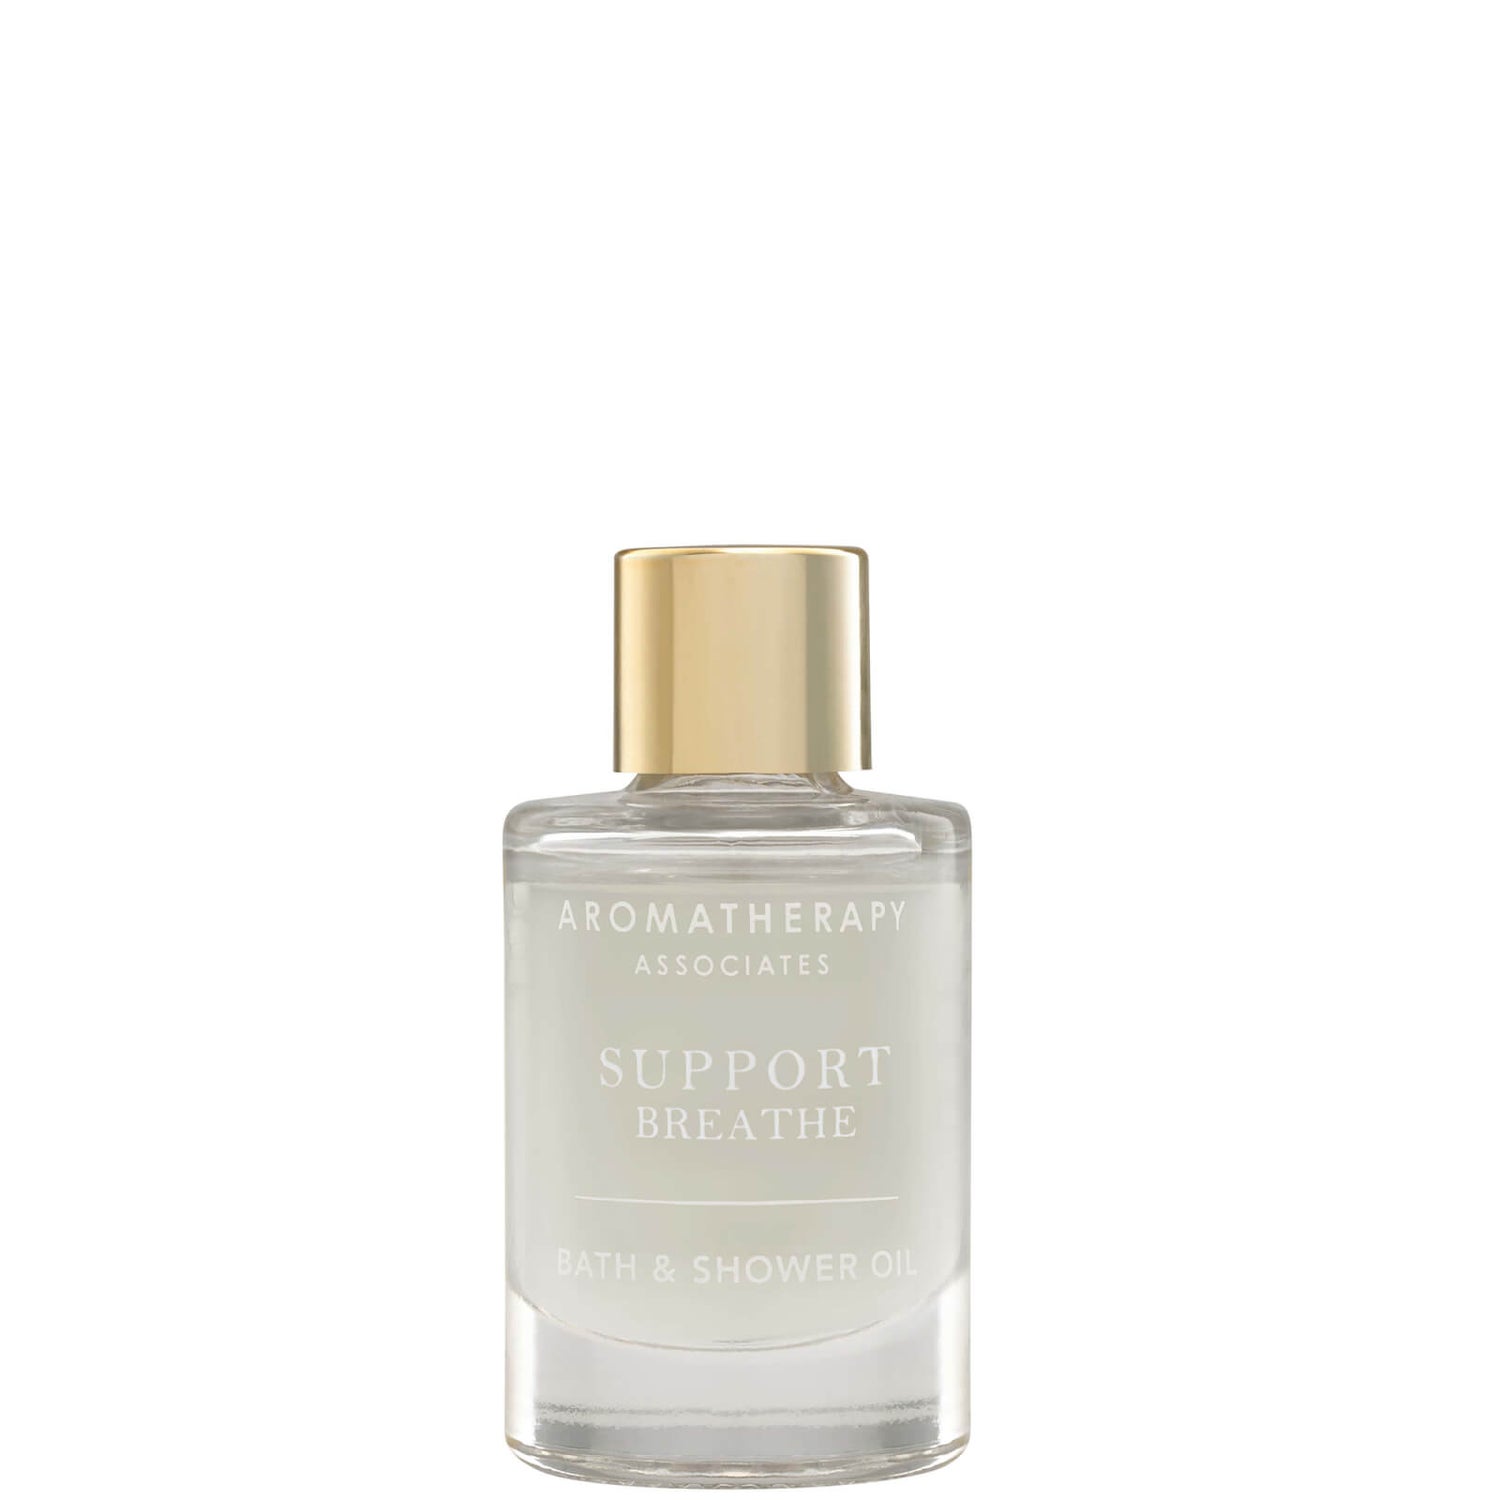 Aromatherapy Associates Support Breathe Bath and Shower Oil 9ml